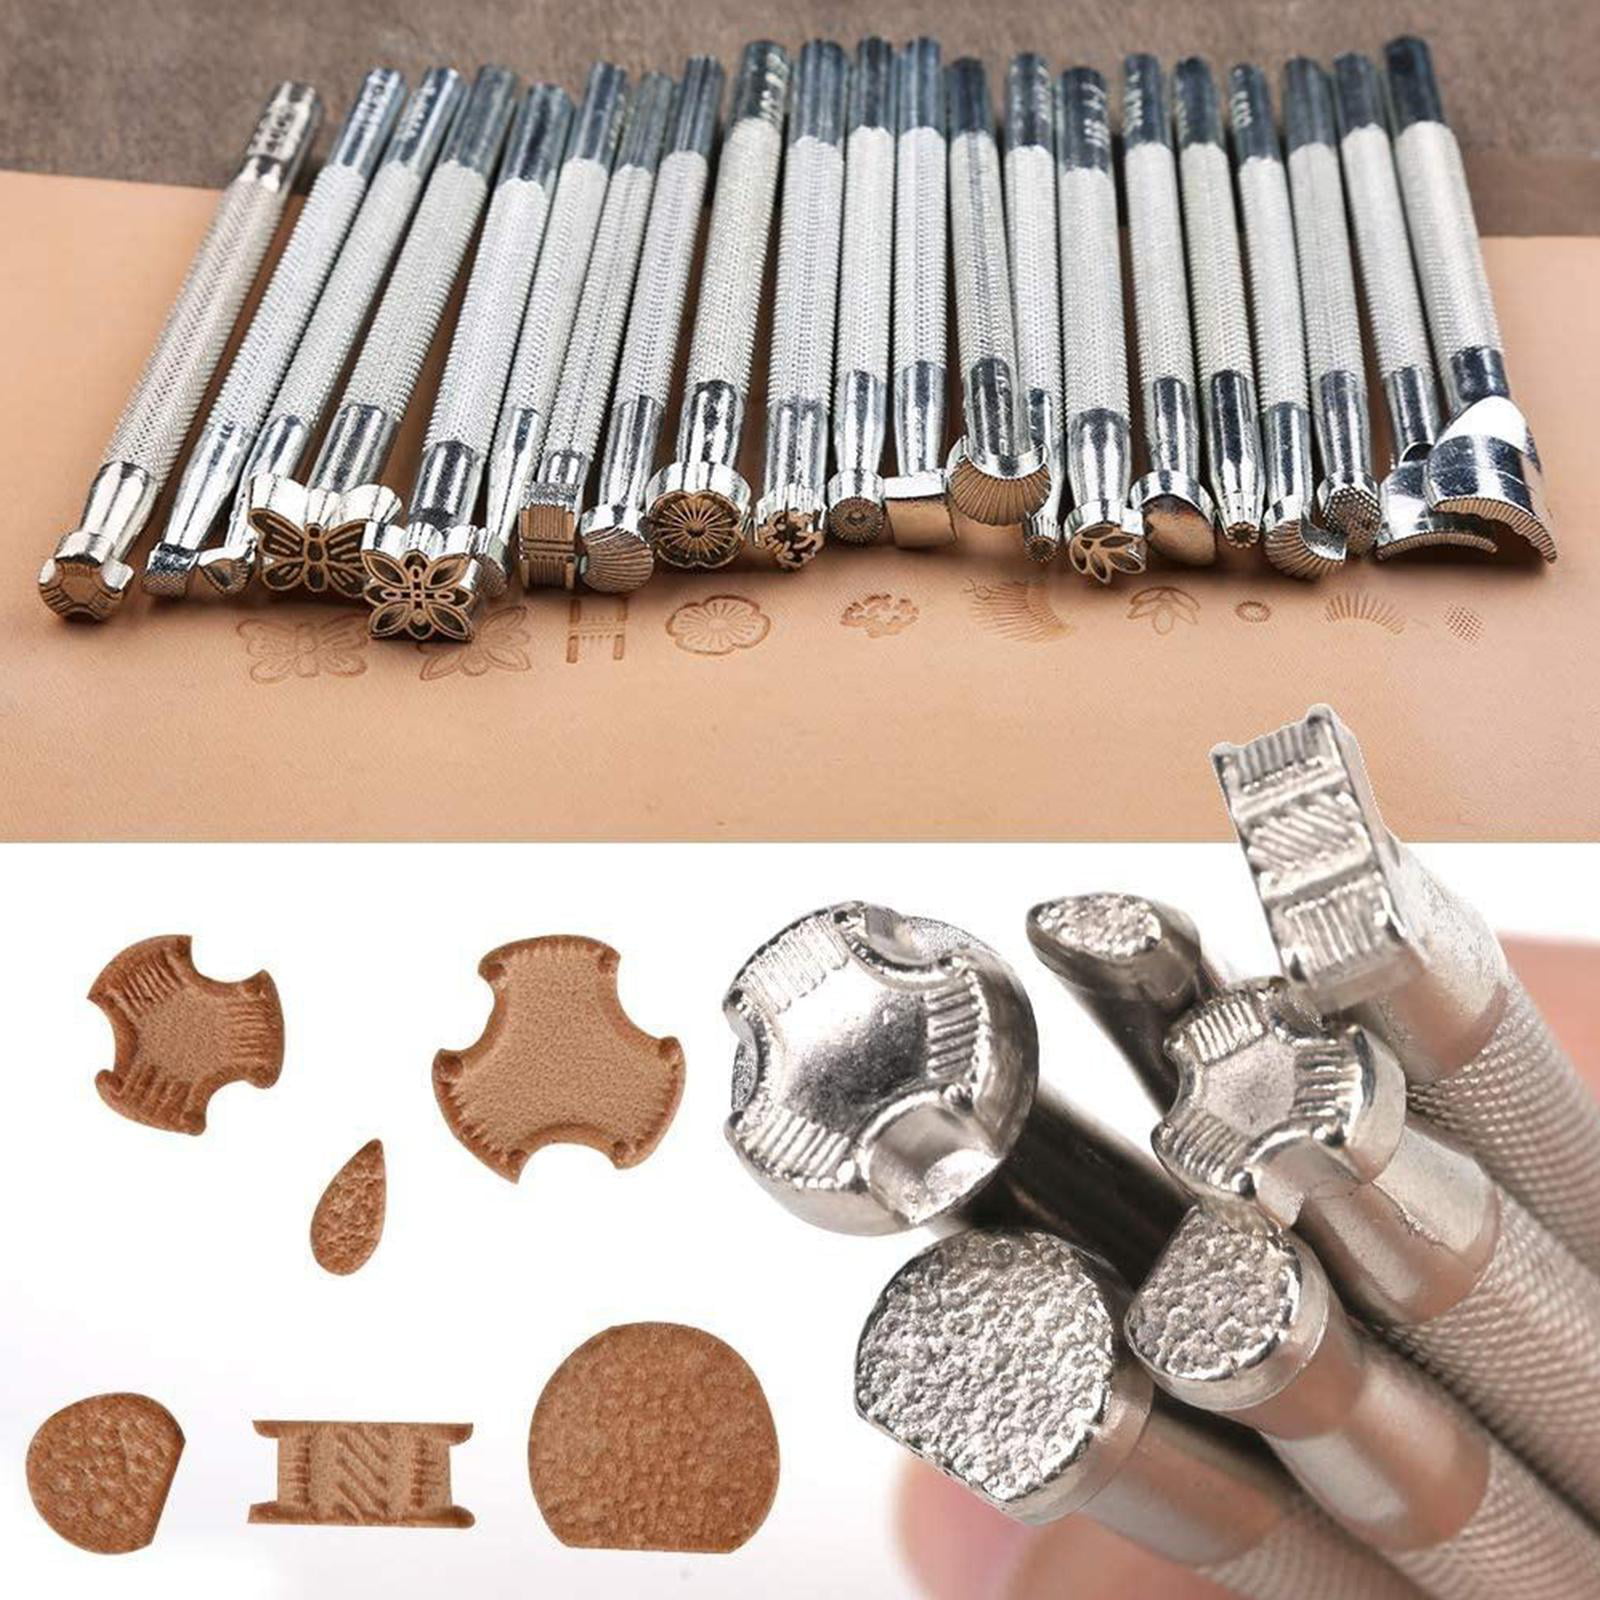 6 Pcs Leather Stamping Tools Sets, Different Shape Pressing Punch Sets,  Quality Carving Leather Craft Tools for DIY Beginners